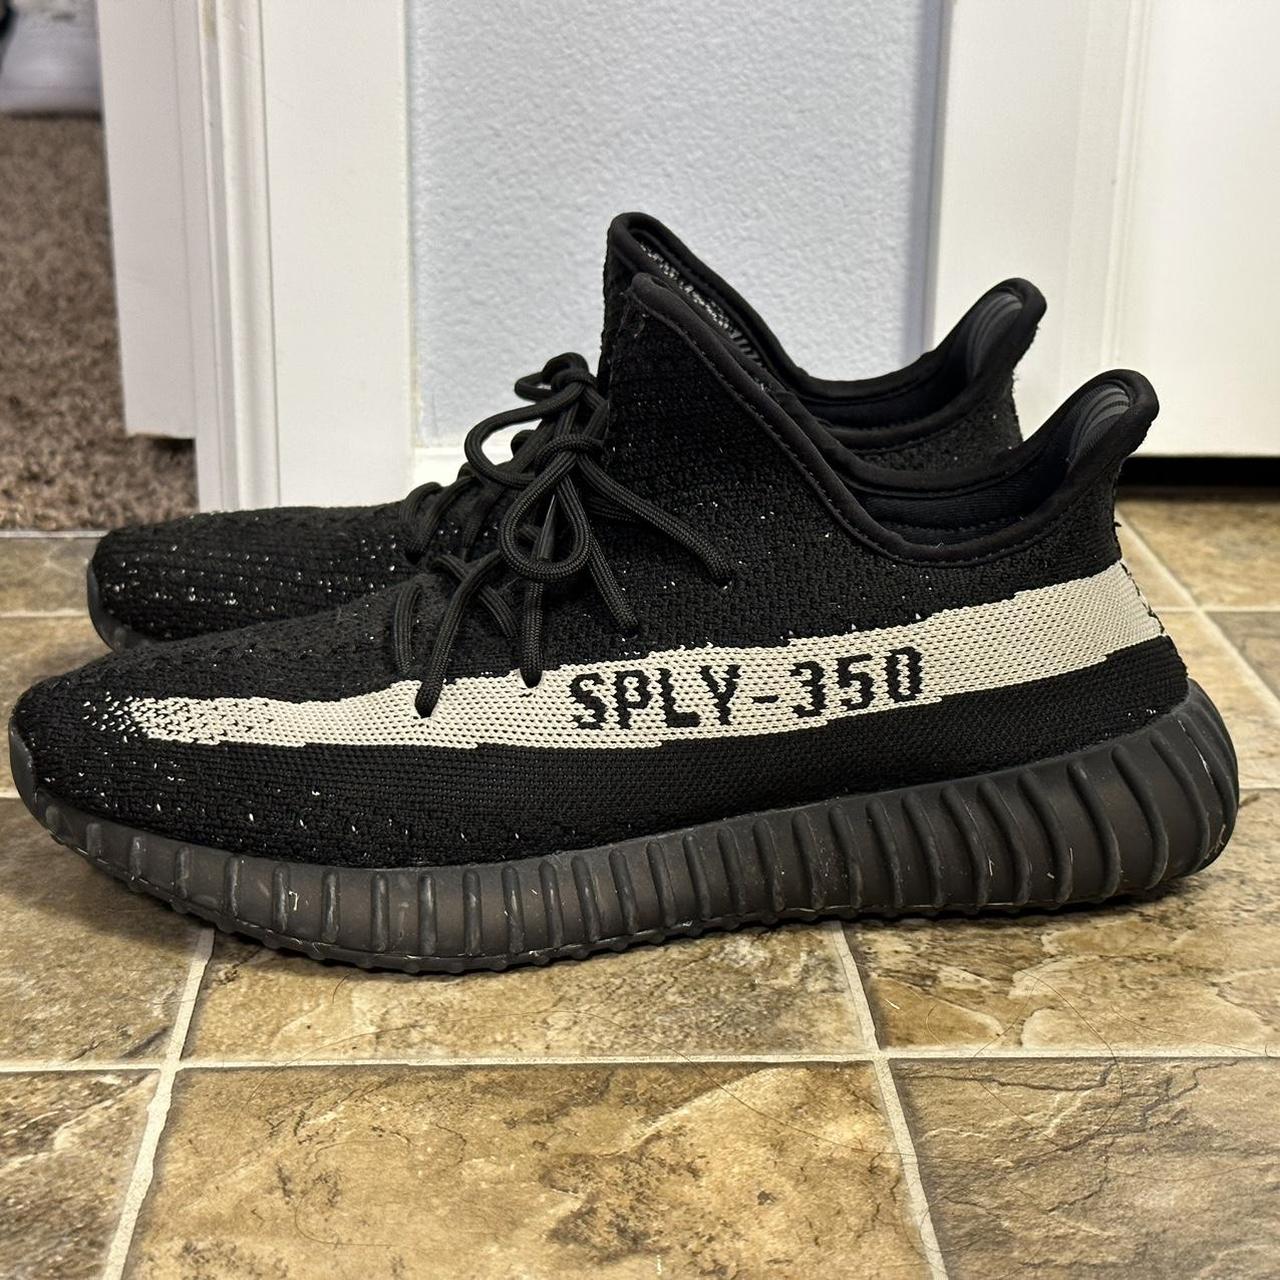 Yeezy Boost 350 Oreo Size 9.5 Condition - 9/10 No box - Depop